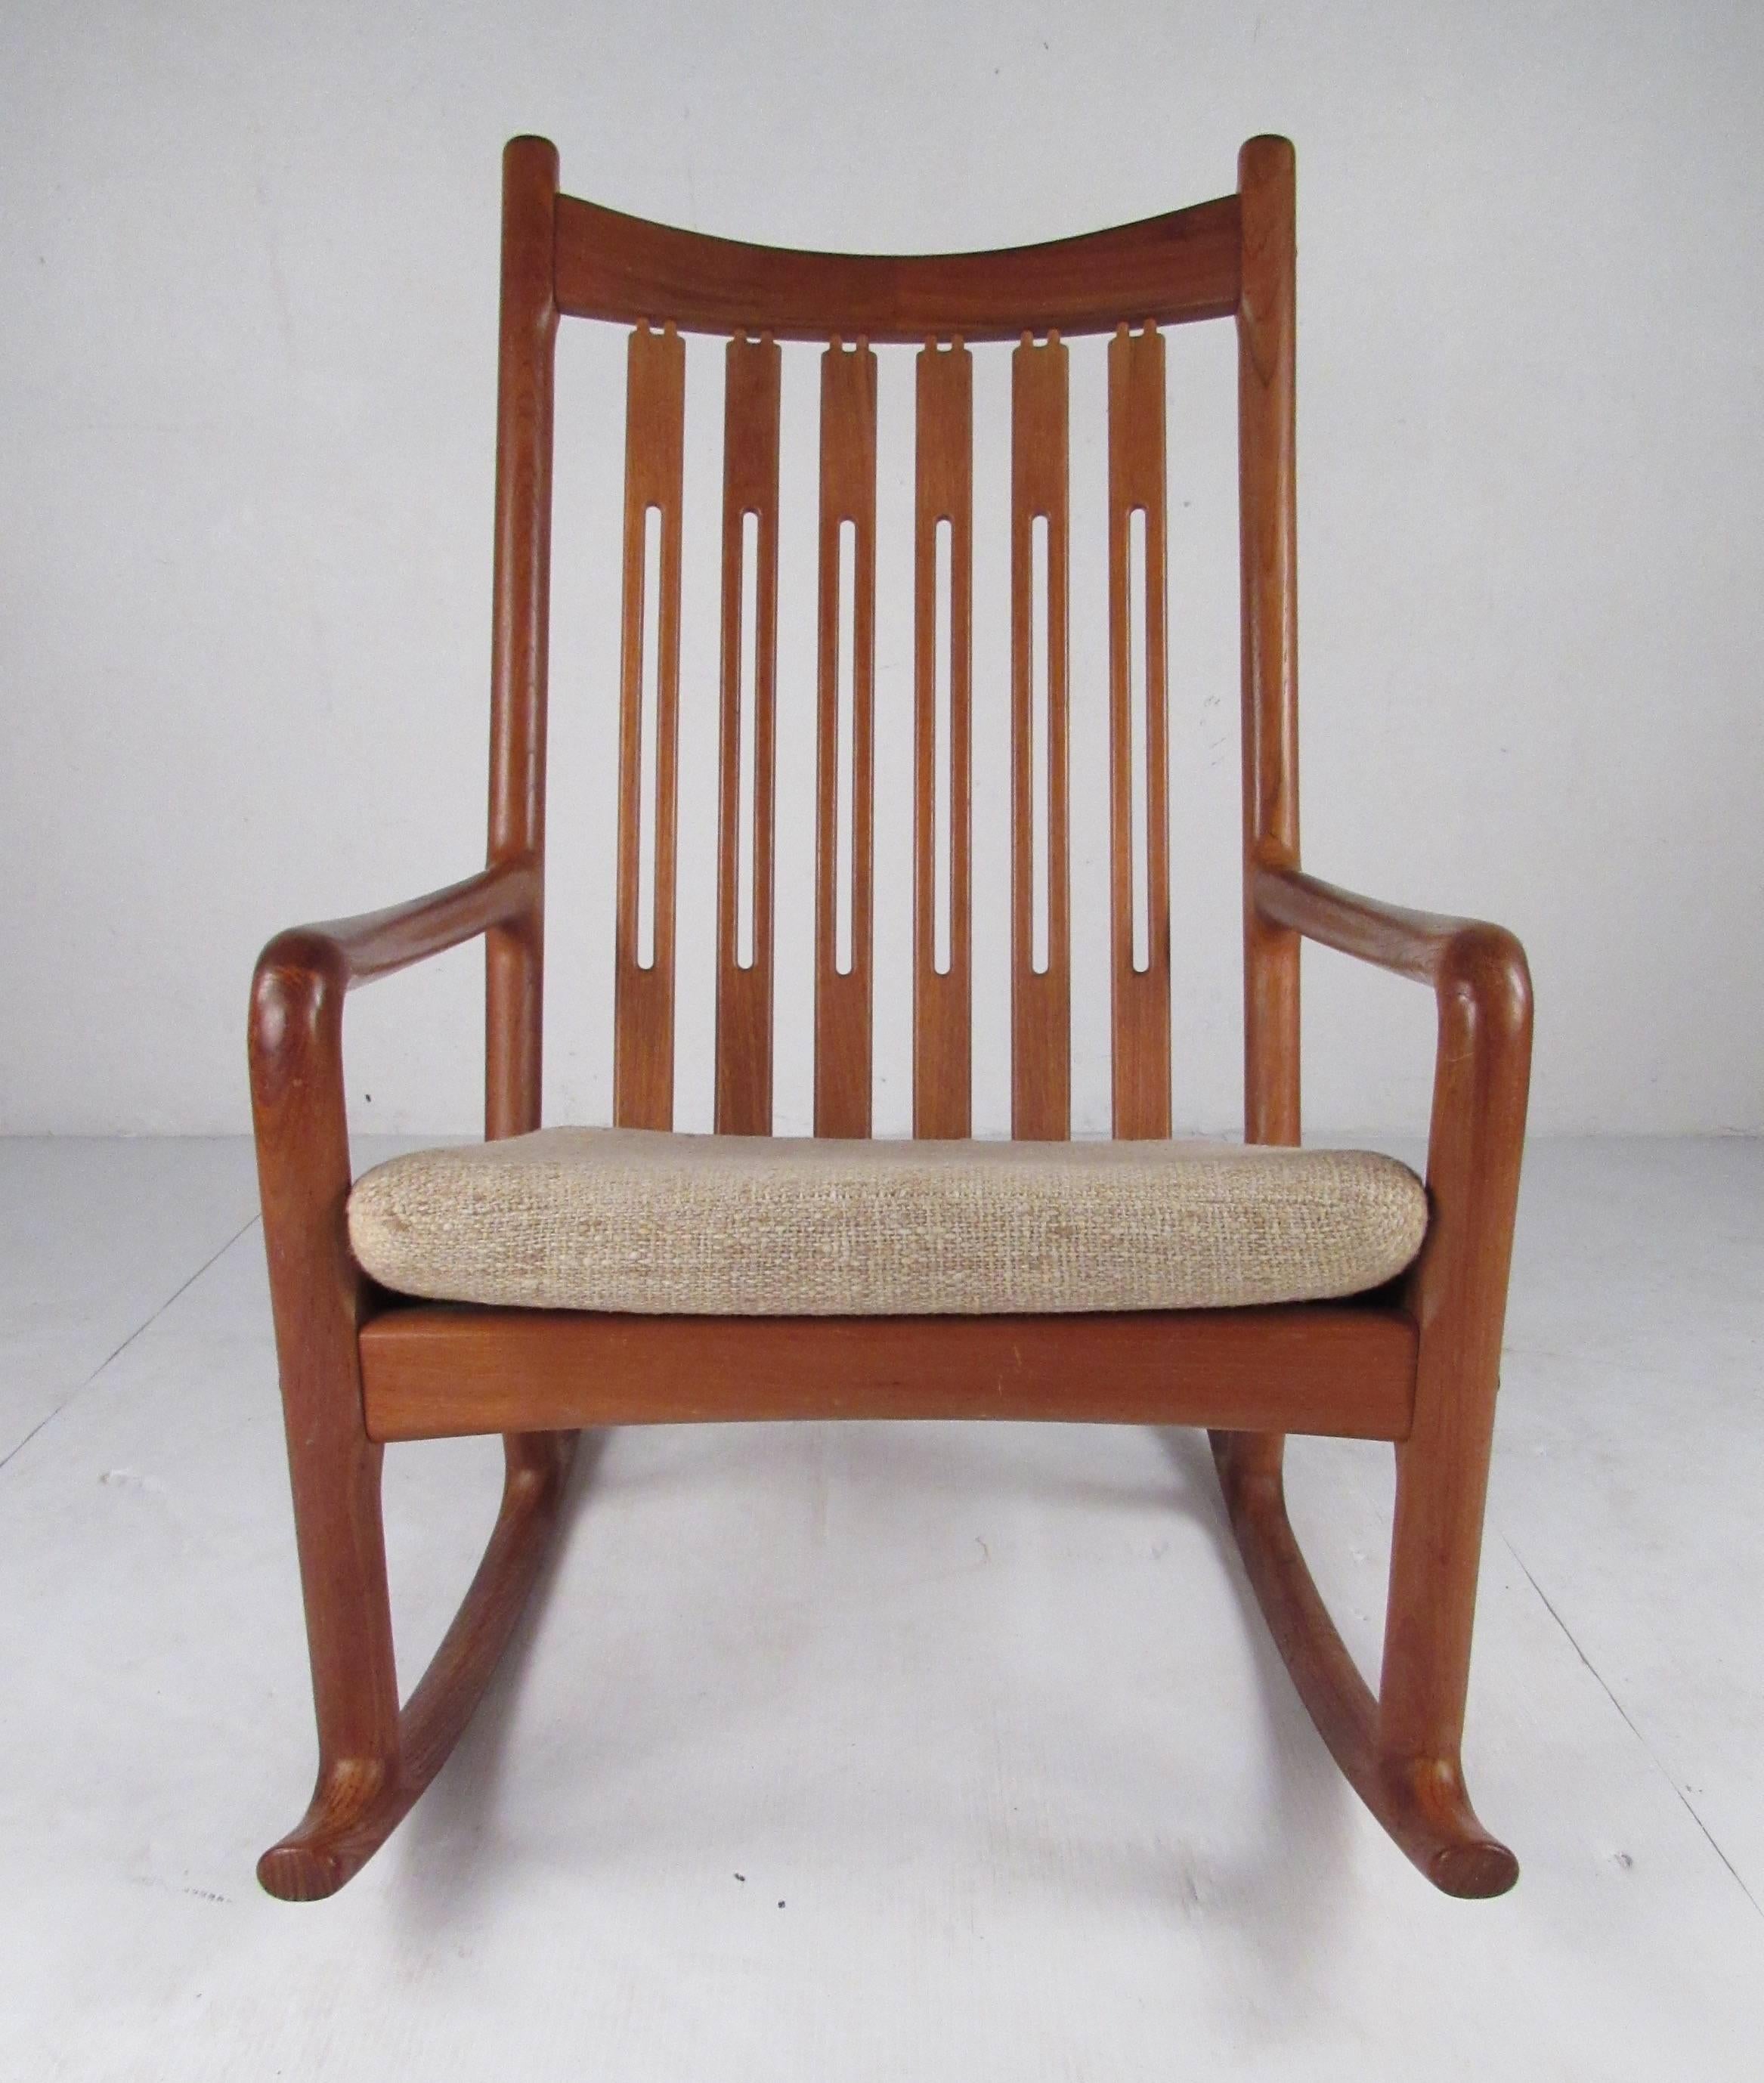 Beautifully constructed Danish modern rocking chair in solid teak. Comfortable and in very good vintage condition, stylish high back rocker perfect for seating in any mid-century or Scandinavian modern styled interior. Please confirm item location